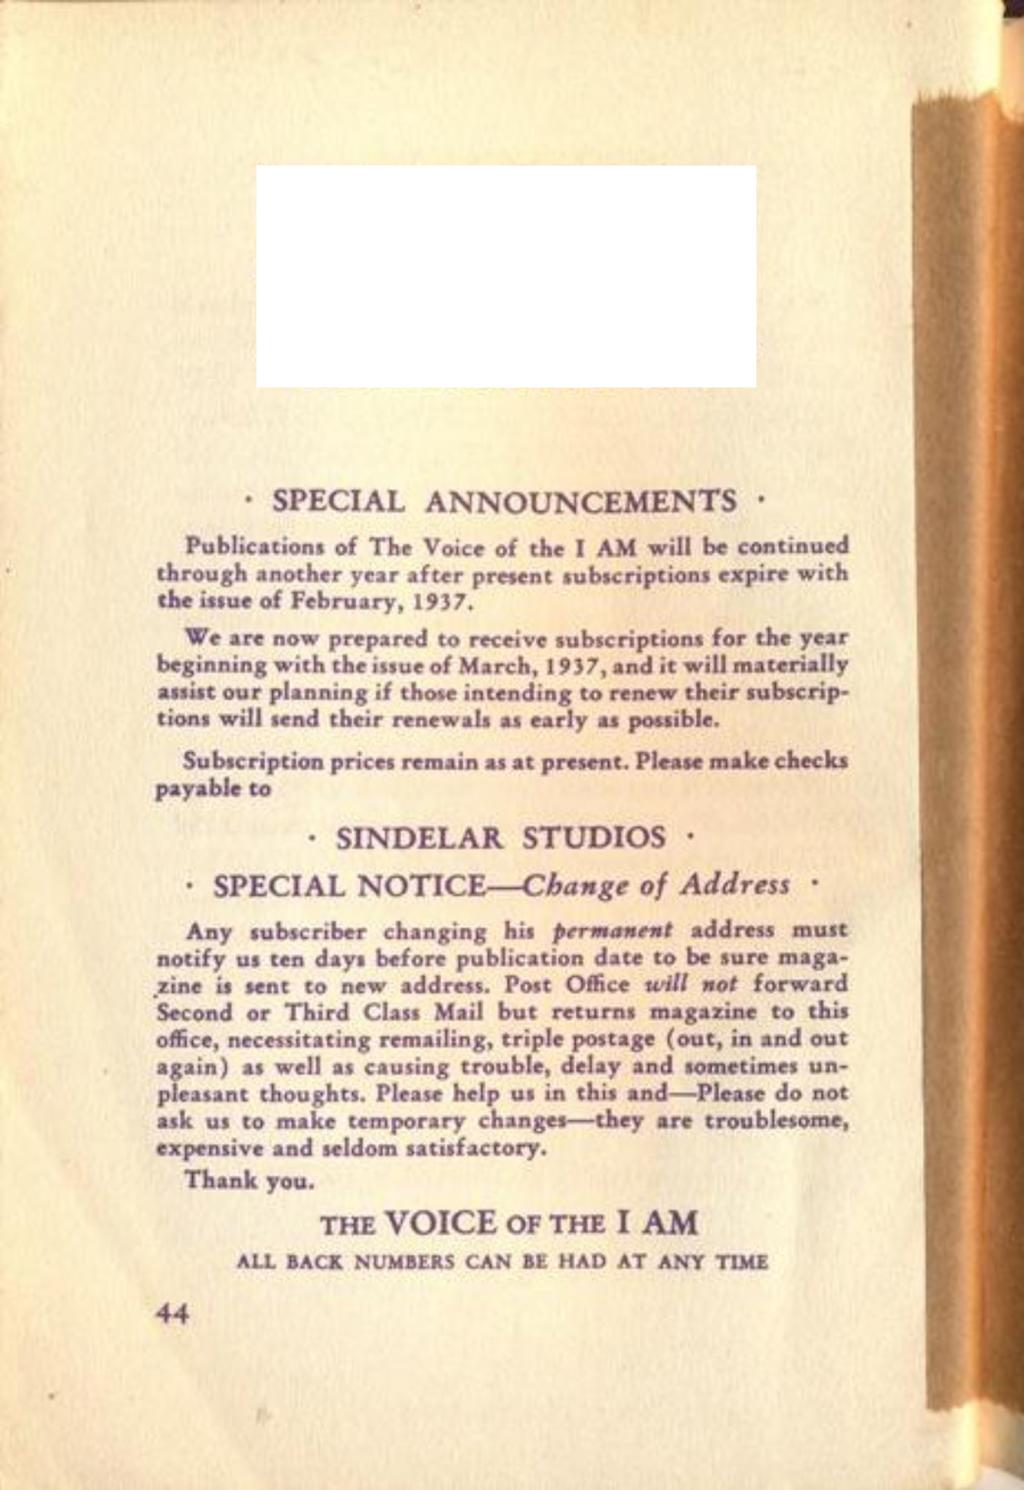 SPECIAL ANNOUNCEMENTS Publication* of The Voice of the I AM will be continued through another year after present subscriptions expire with the issue of February, 1937.